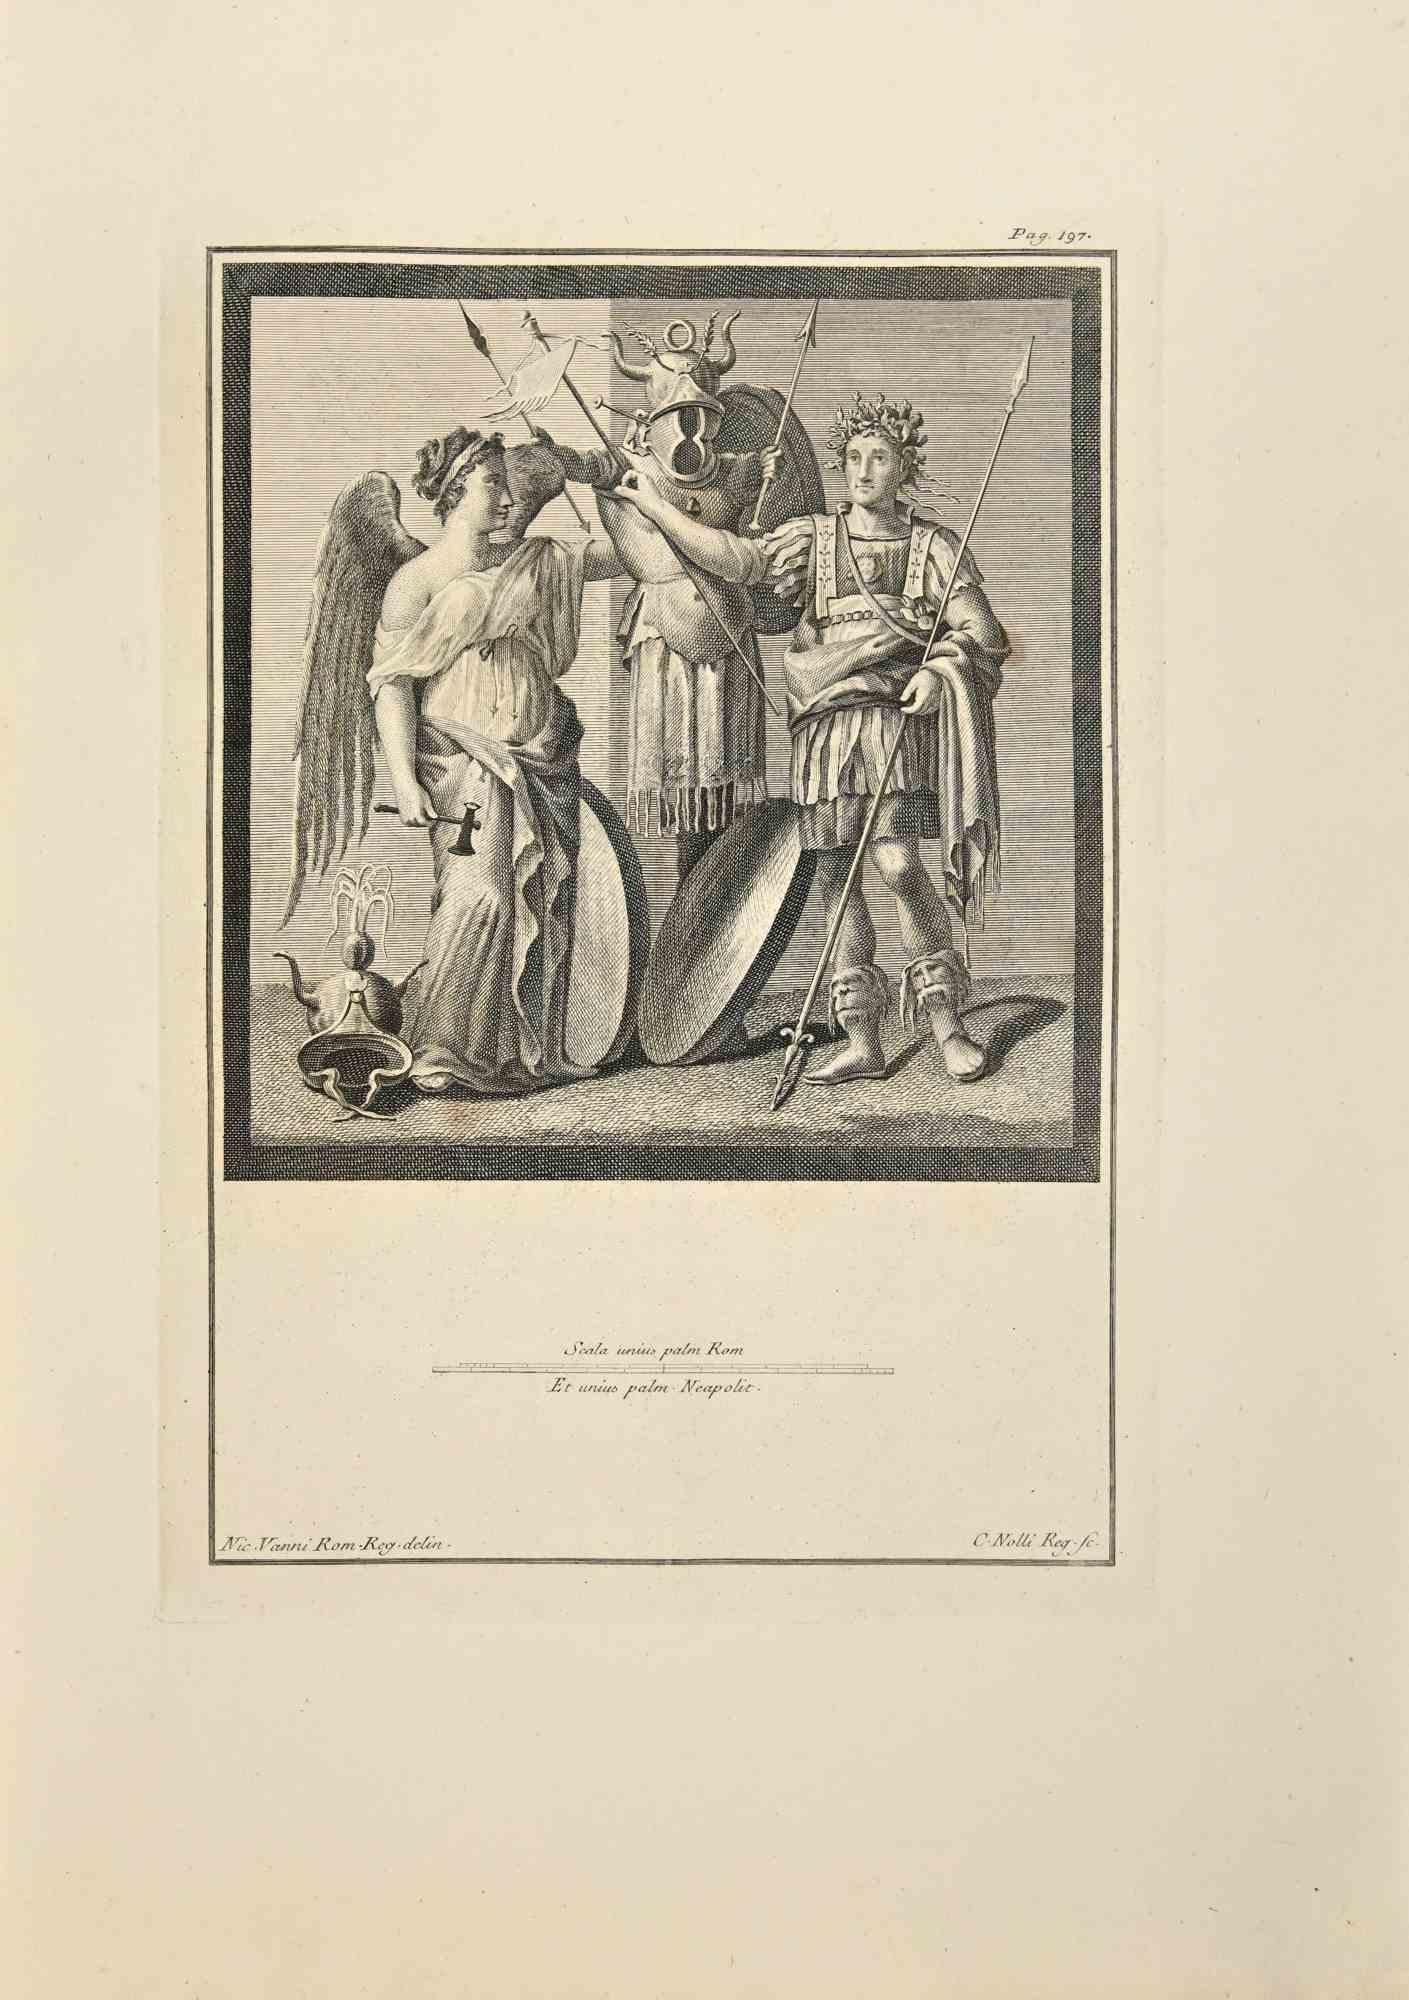 Victory and Trophies from "Antiquities of Herculaneum" is an etching on paper realized by Carlo Norlli in the 18th Century.

Signed on the plate.

Good conditions and aged with some folding.

The etching belongs to the print suite “Antiquities of